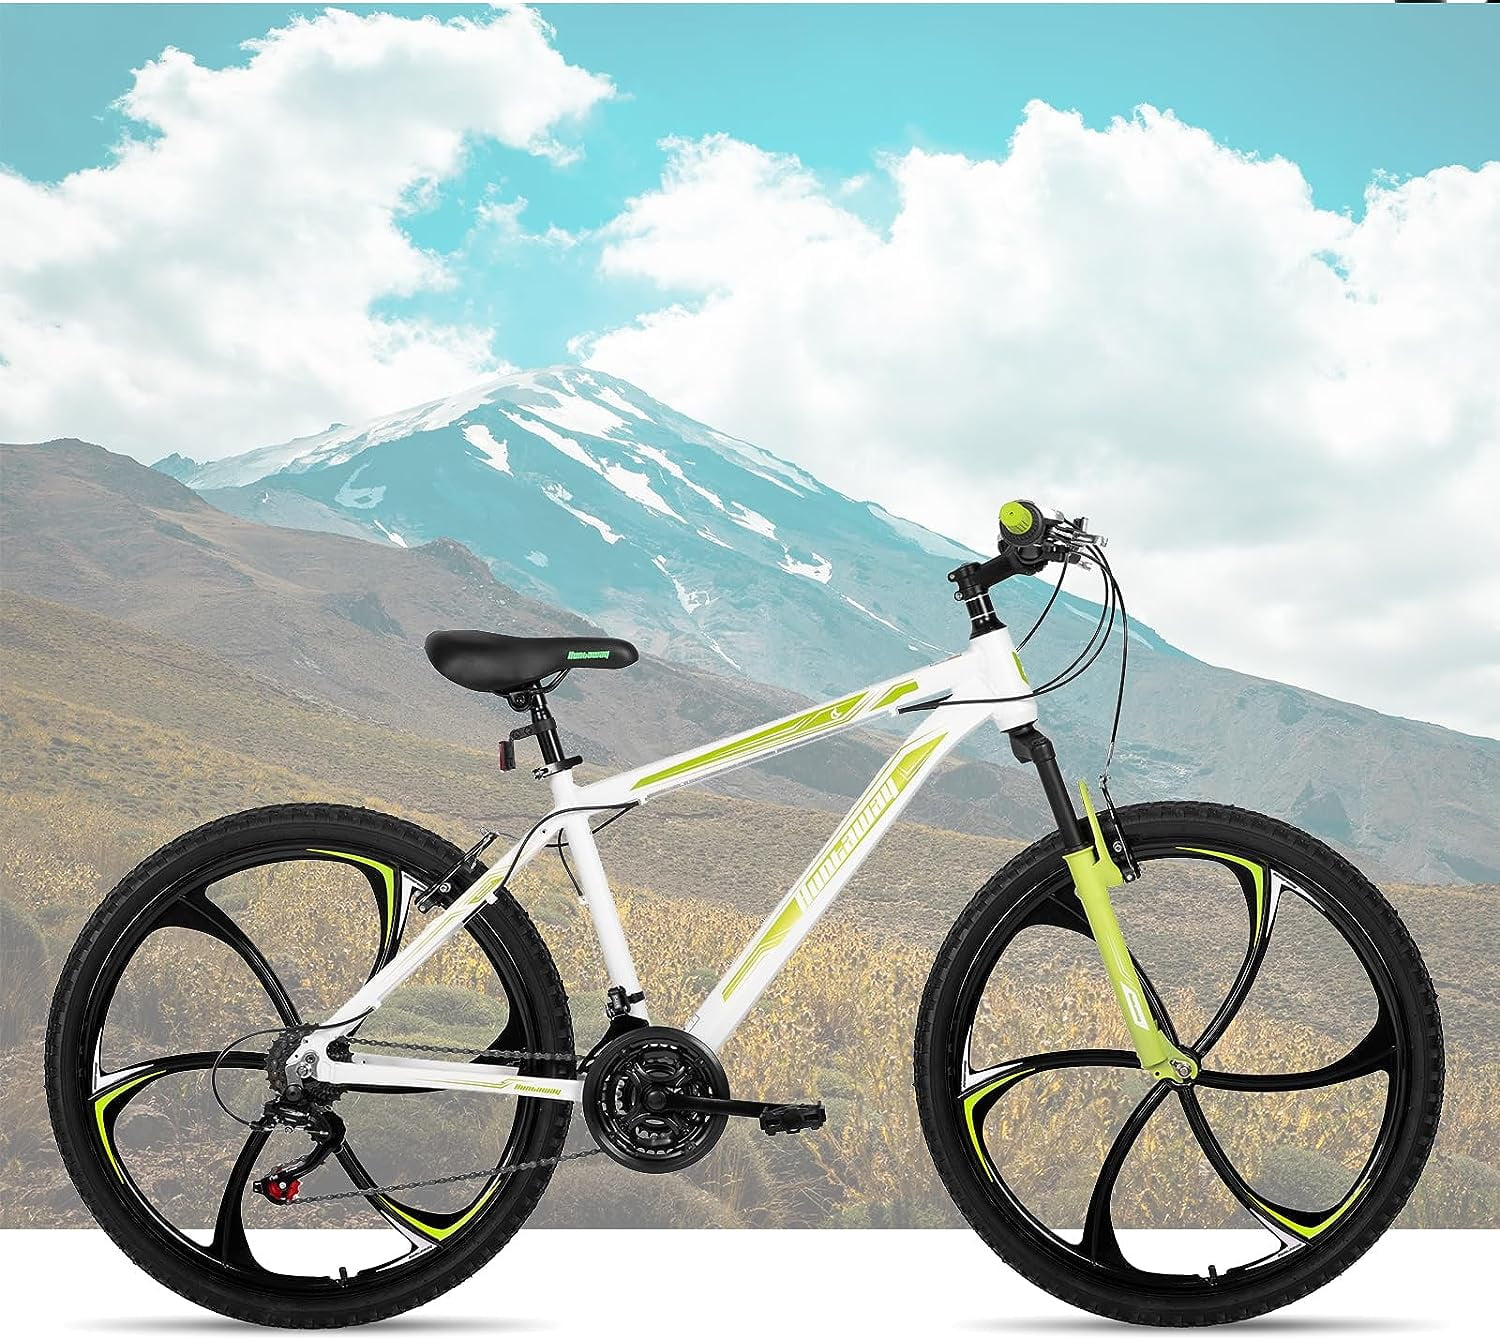 Hiland Humtway 26 inch Mountain Bike for Mens and Womens.